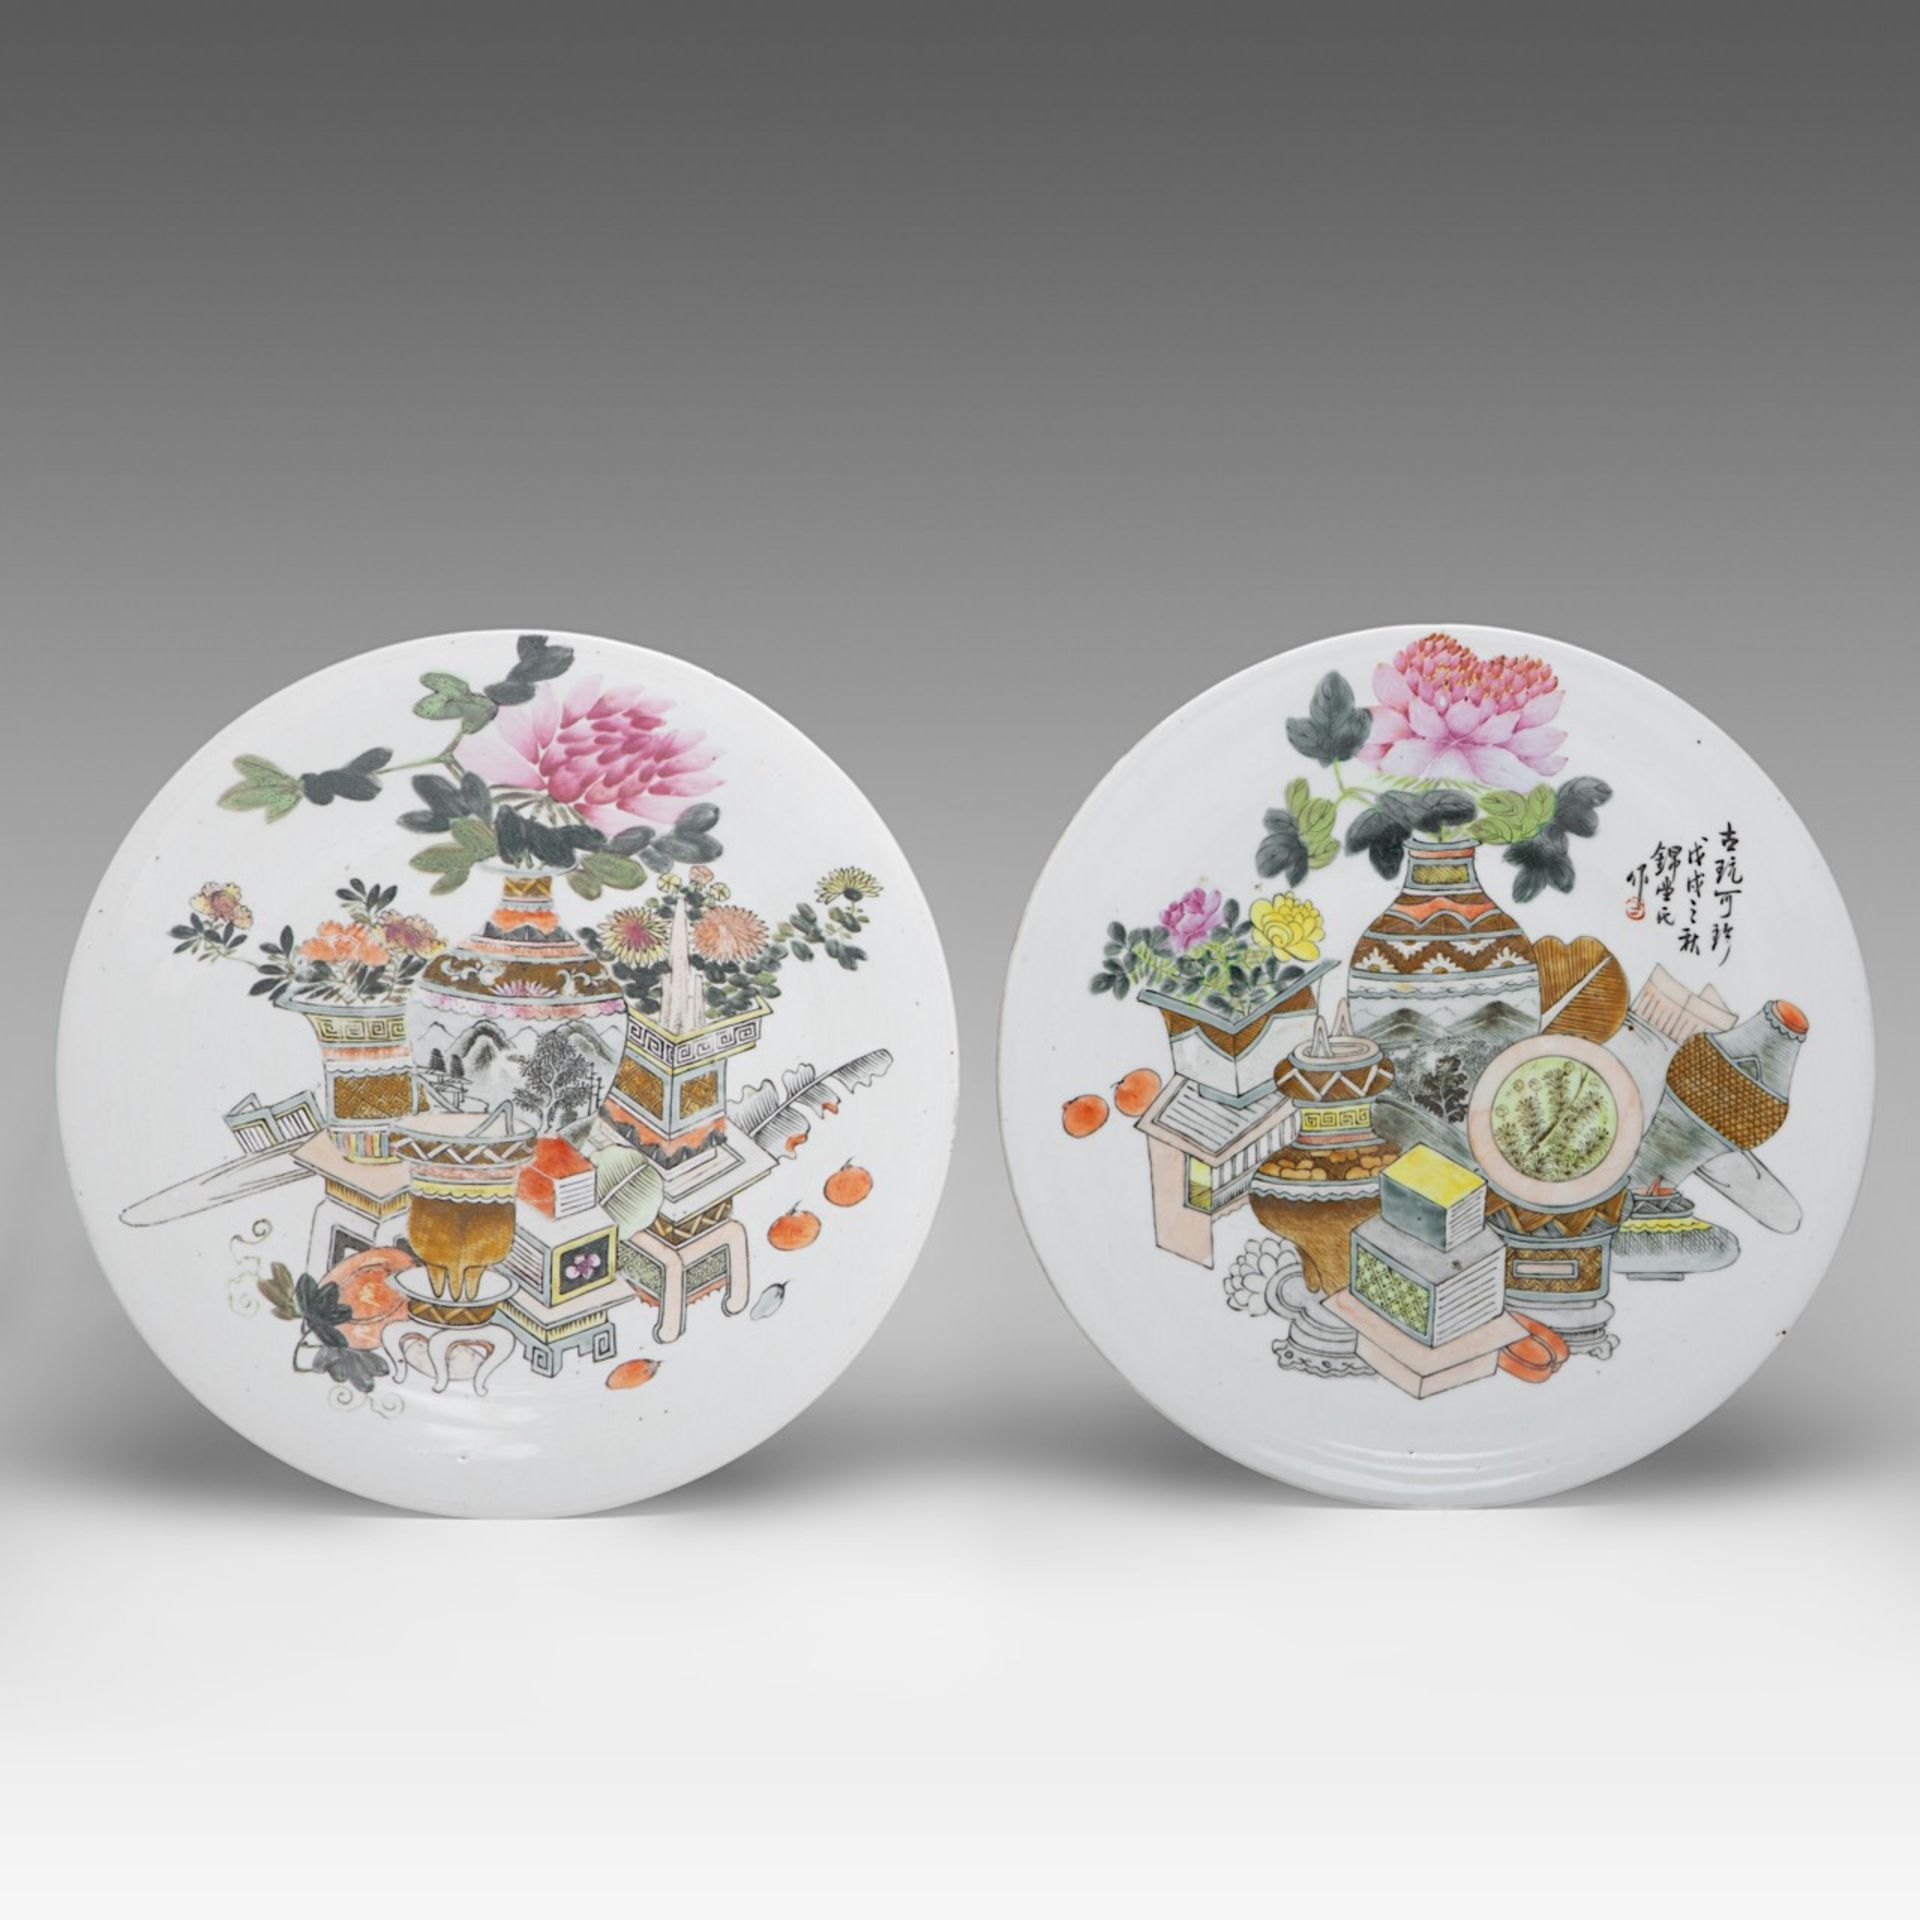 Two Chinese Qianjiangcai 'One Hundred Treasures' plates, both marked, one with a signed text, 19thC,